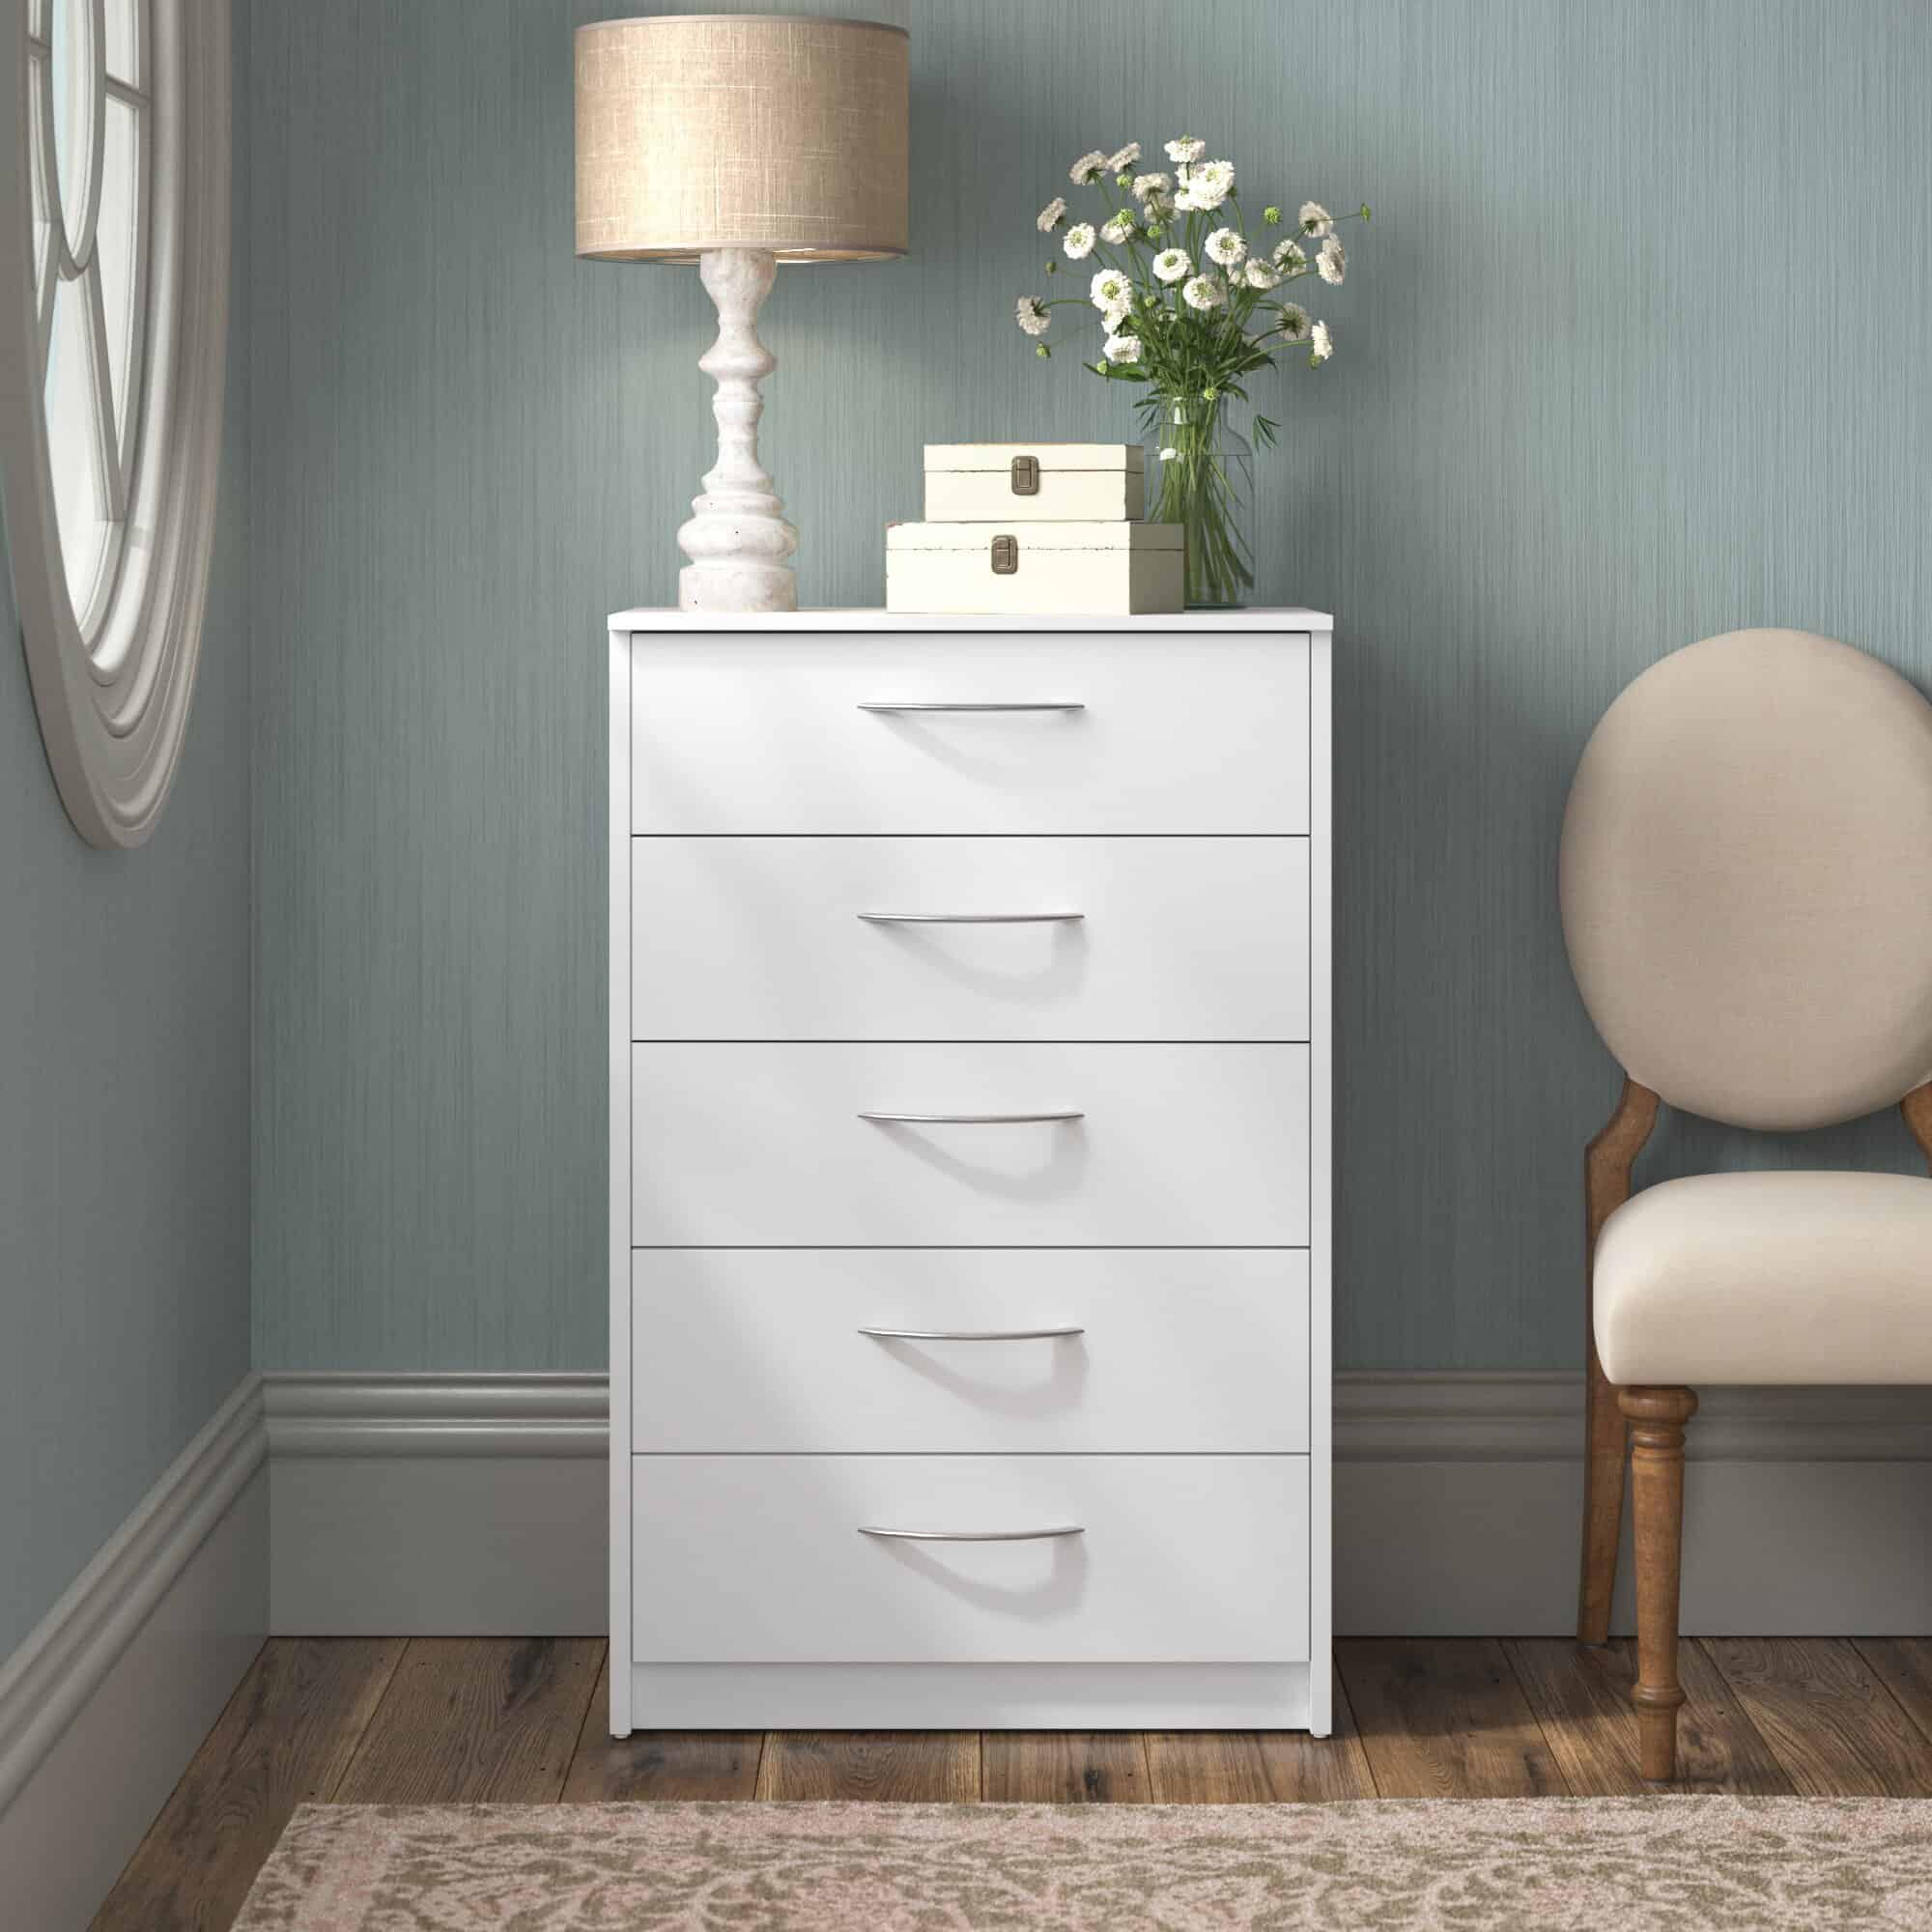 You Can't Go Wrong With A Simple White Dresser